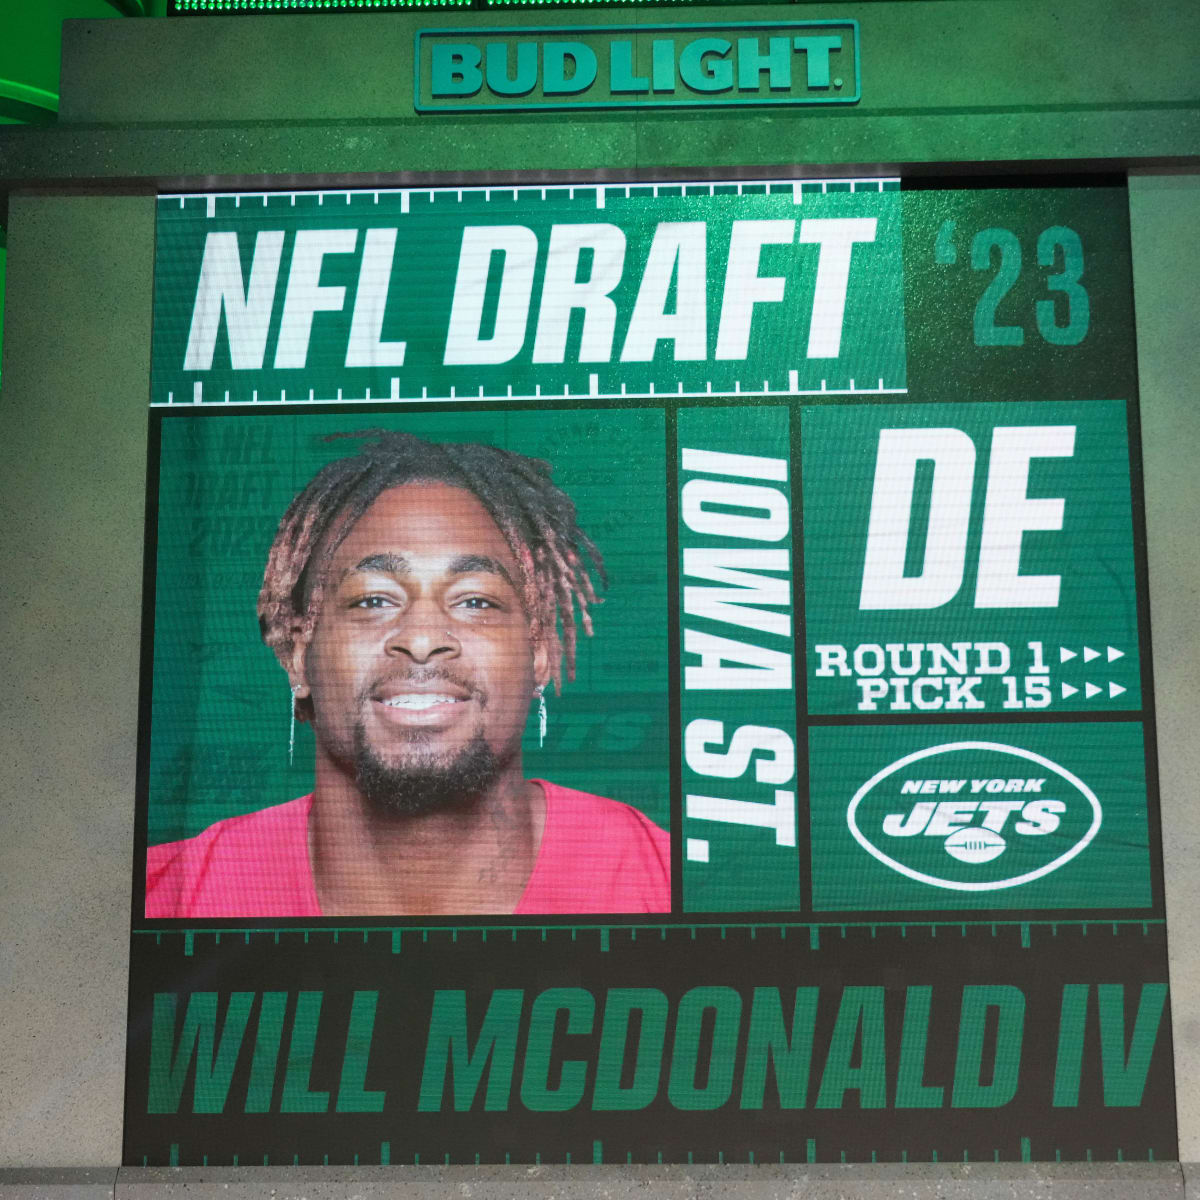 Jets draft picks: Grades for New York selections in 2022 NFL Draft